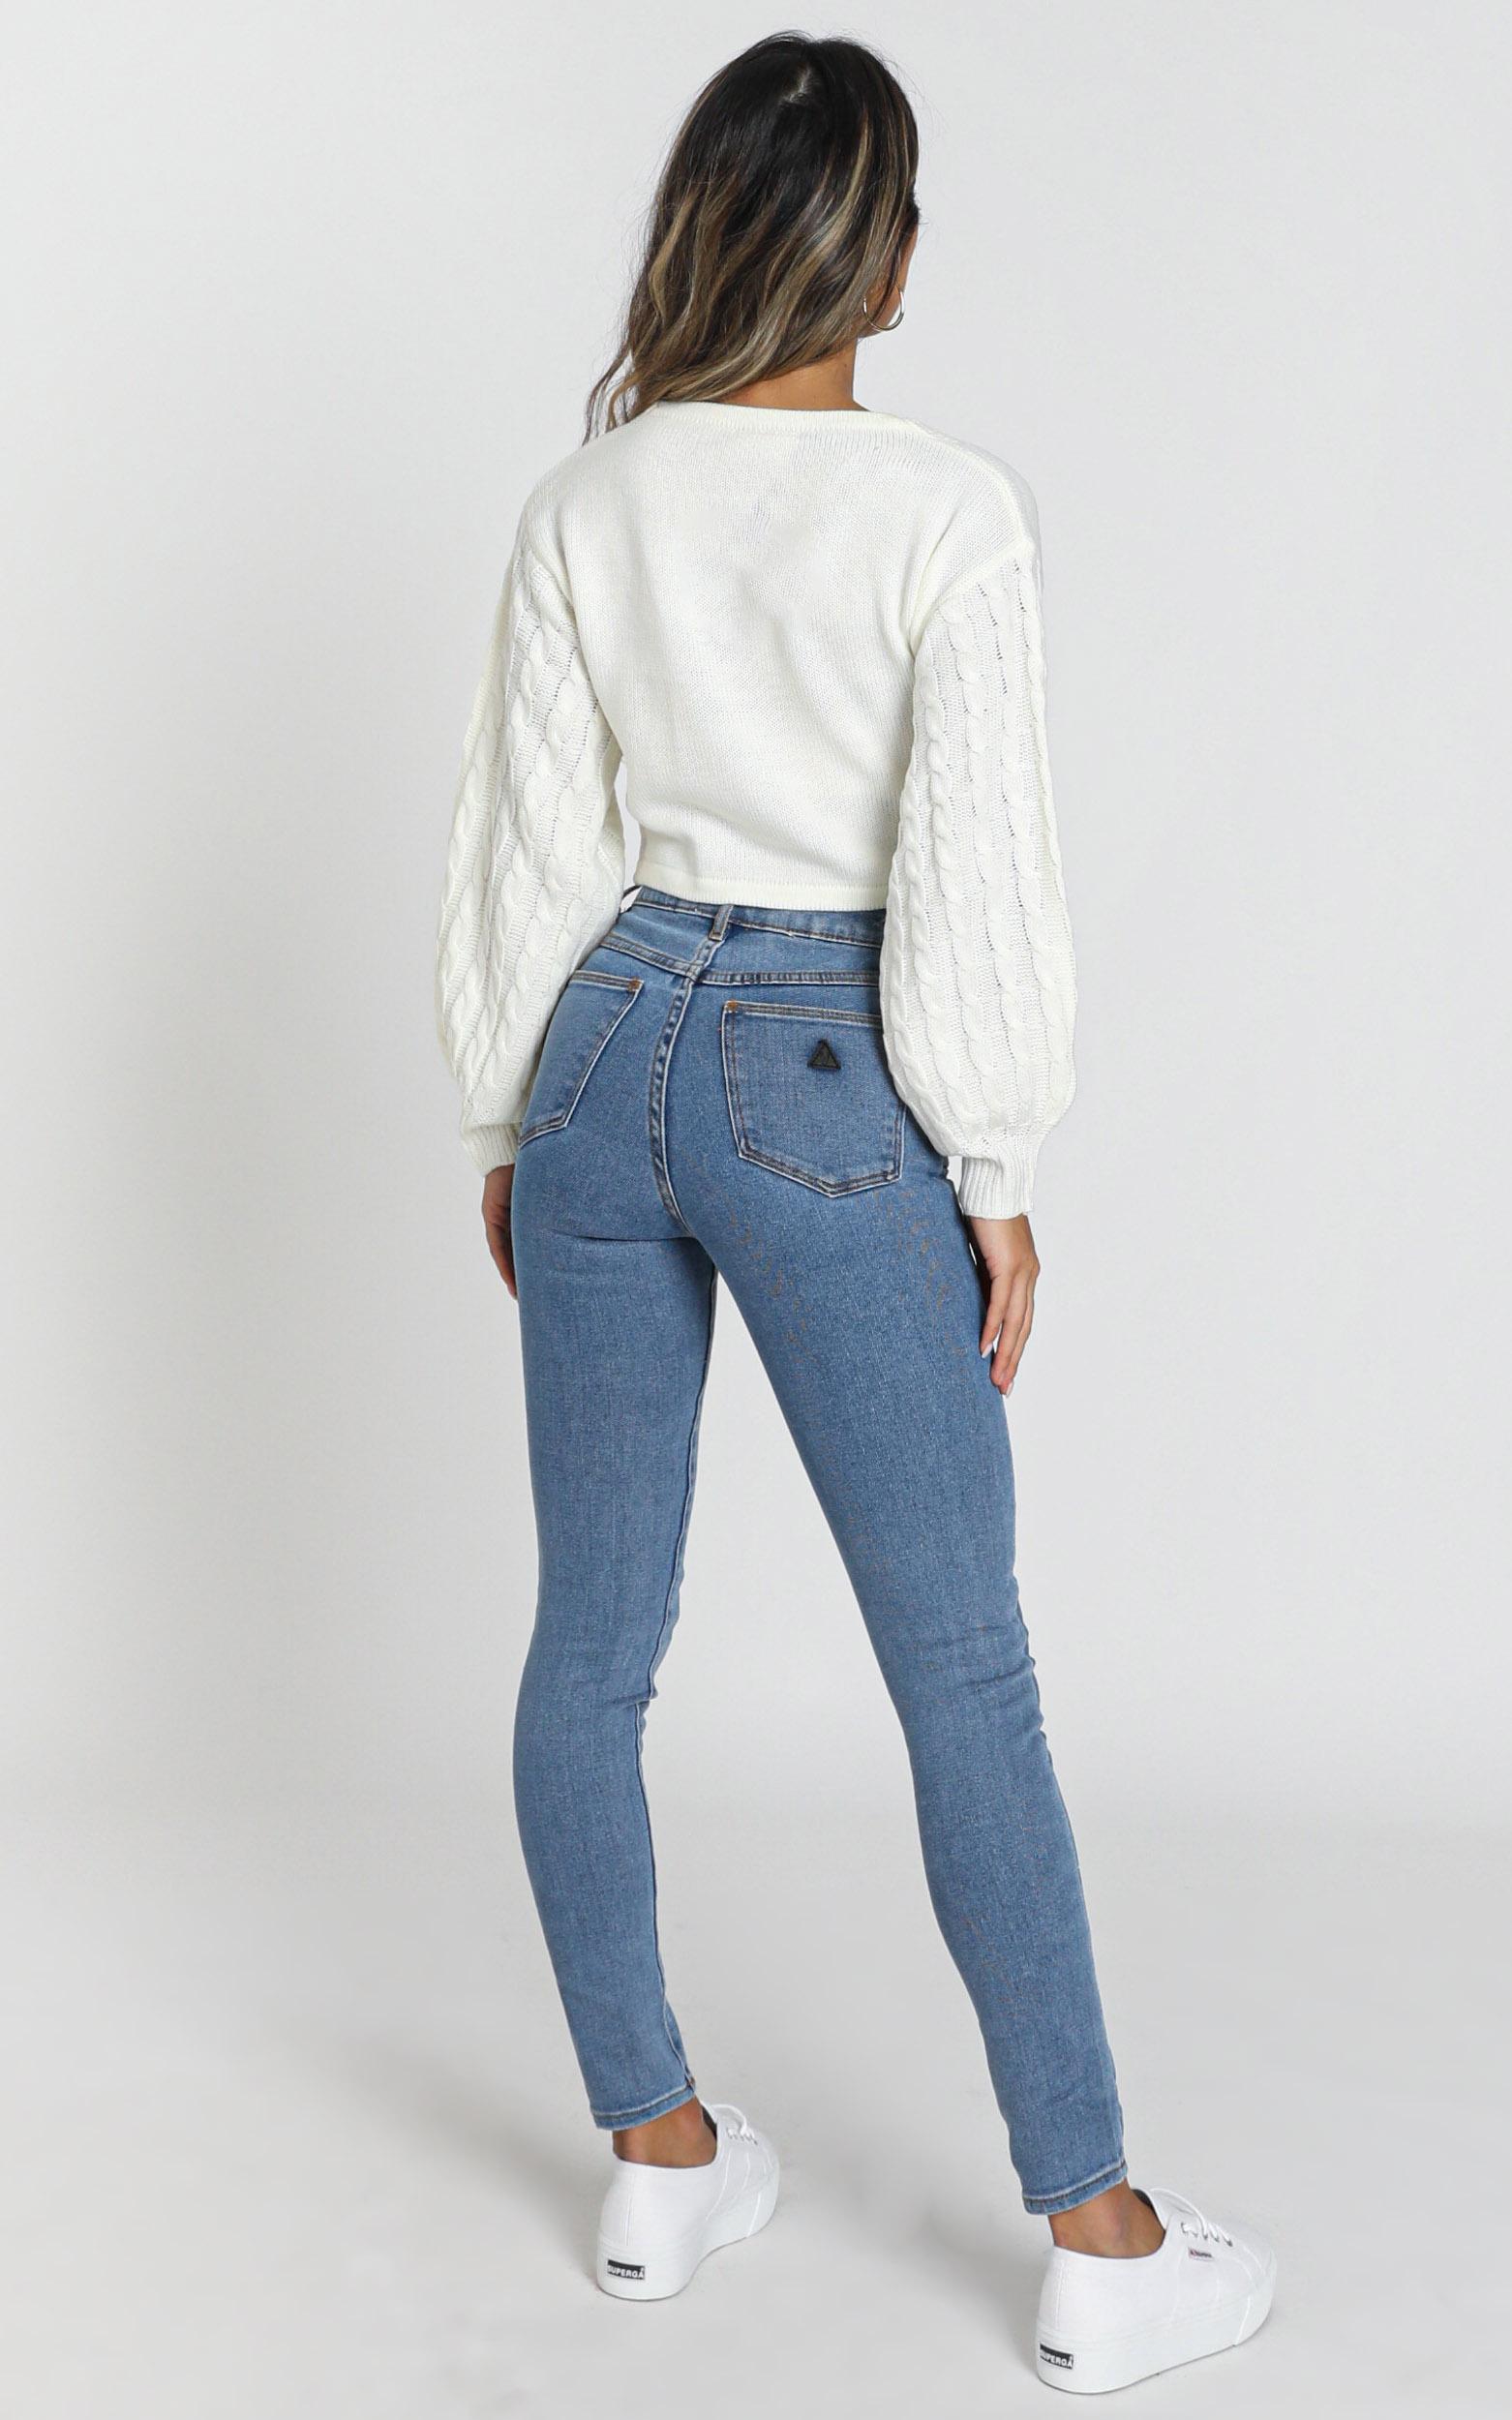 abrand la blues high skinny ankle basher jeans